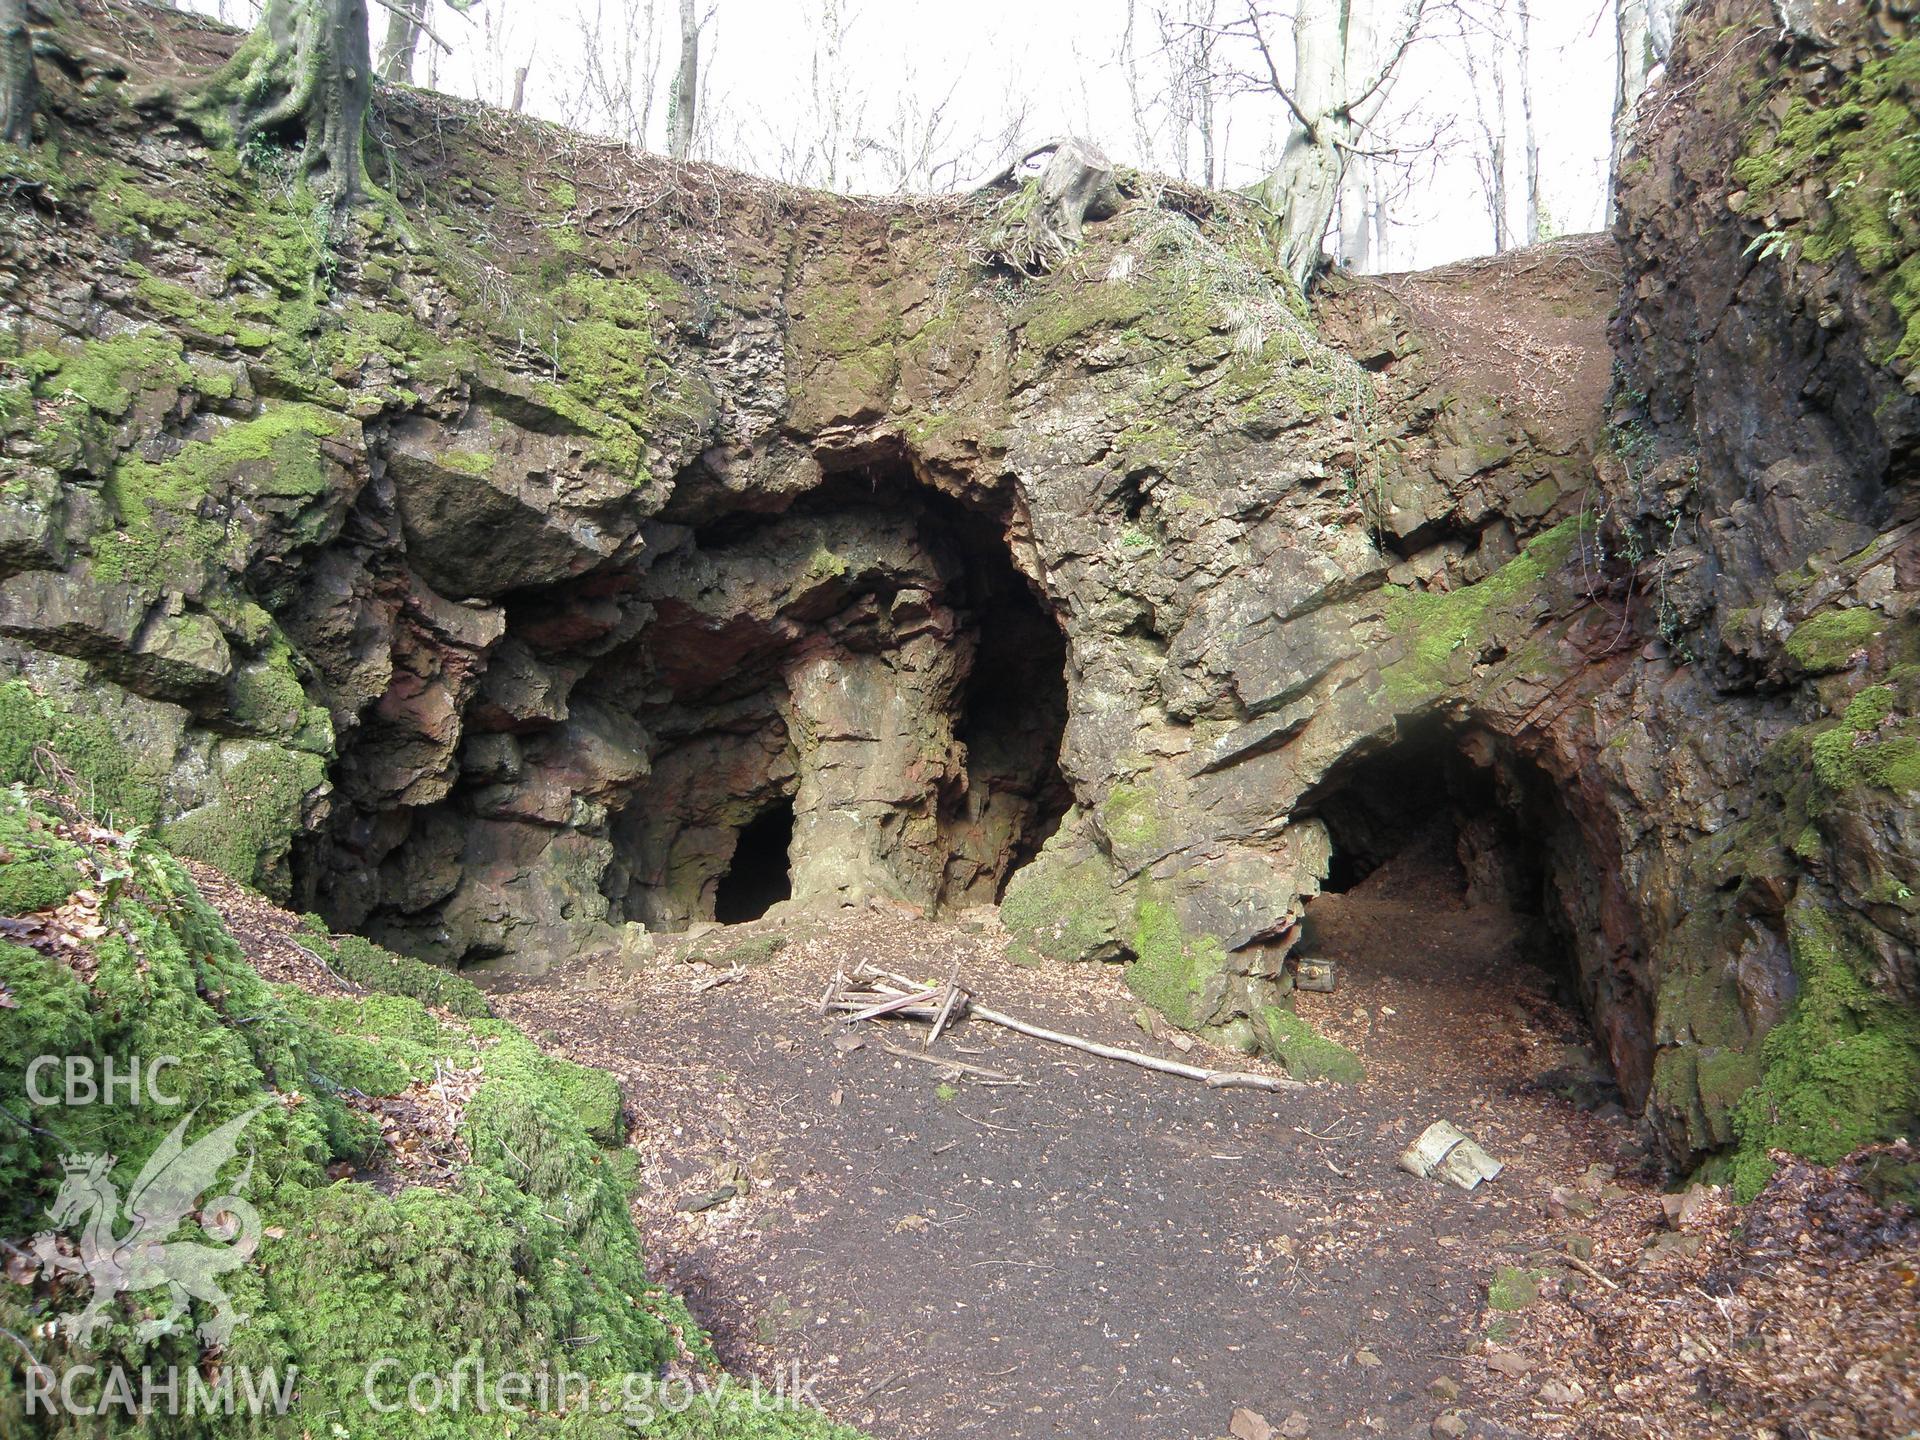 Colour photo showing Tongwynlais Iron Mines, taken by Paul R. Davis, 10th March 2012.